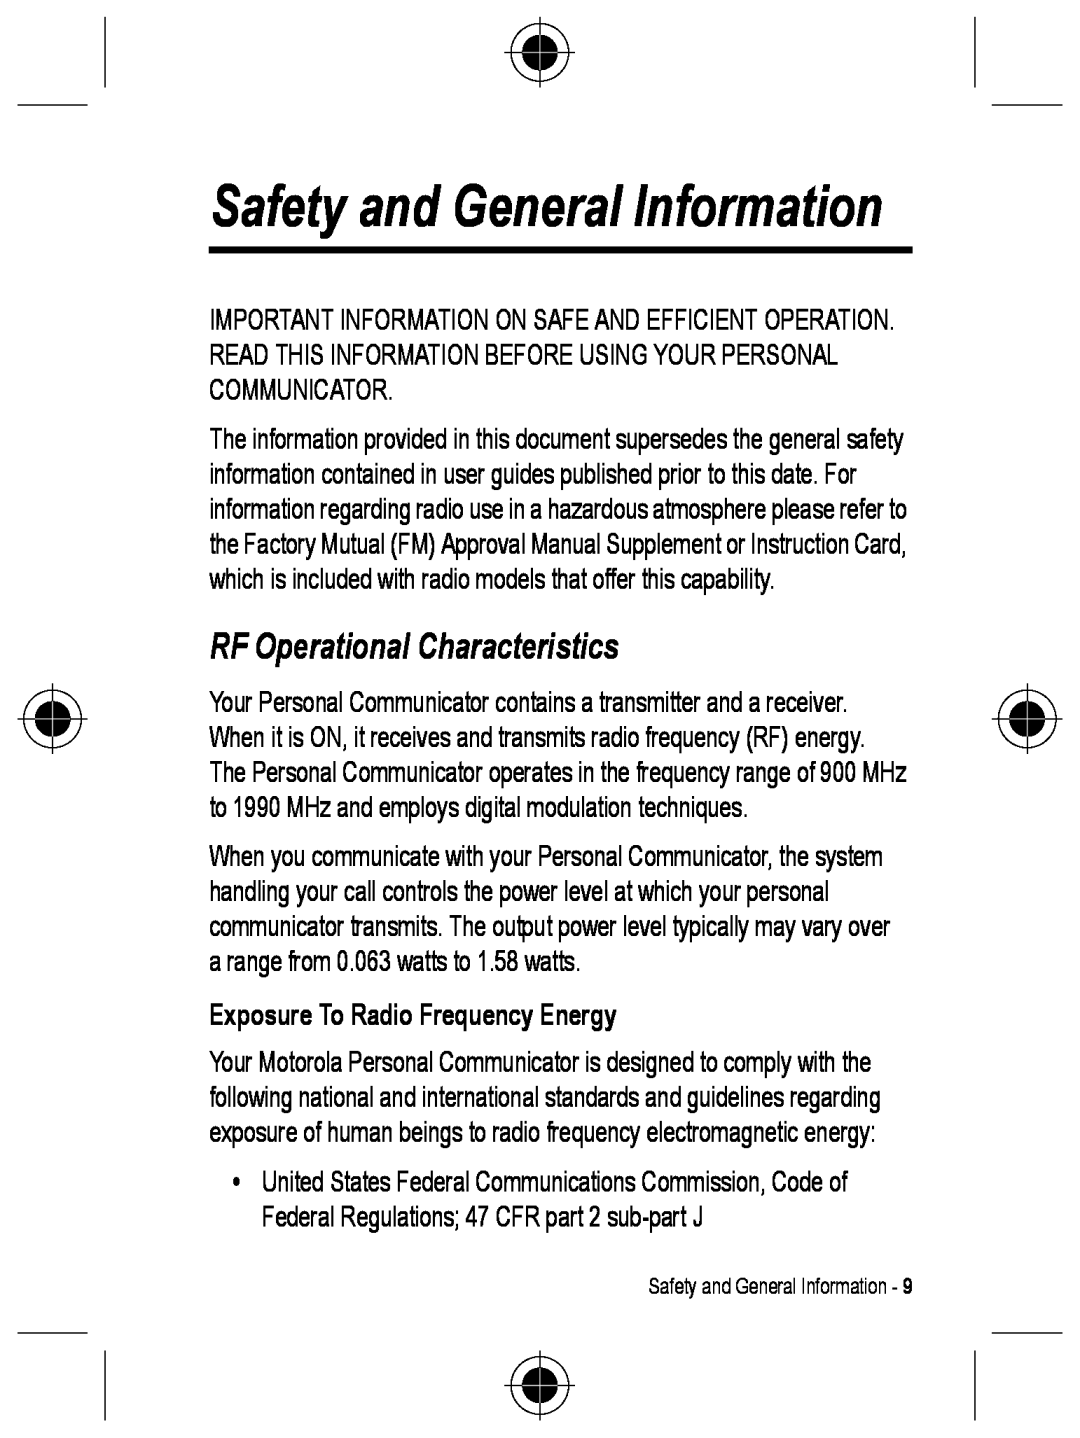 Motorola C330 manual Safety and General Information, RF Operational Characteristics, Exposure To Radio Frequency Energy 